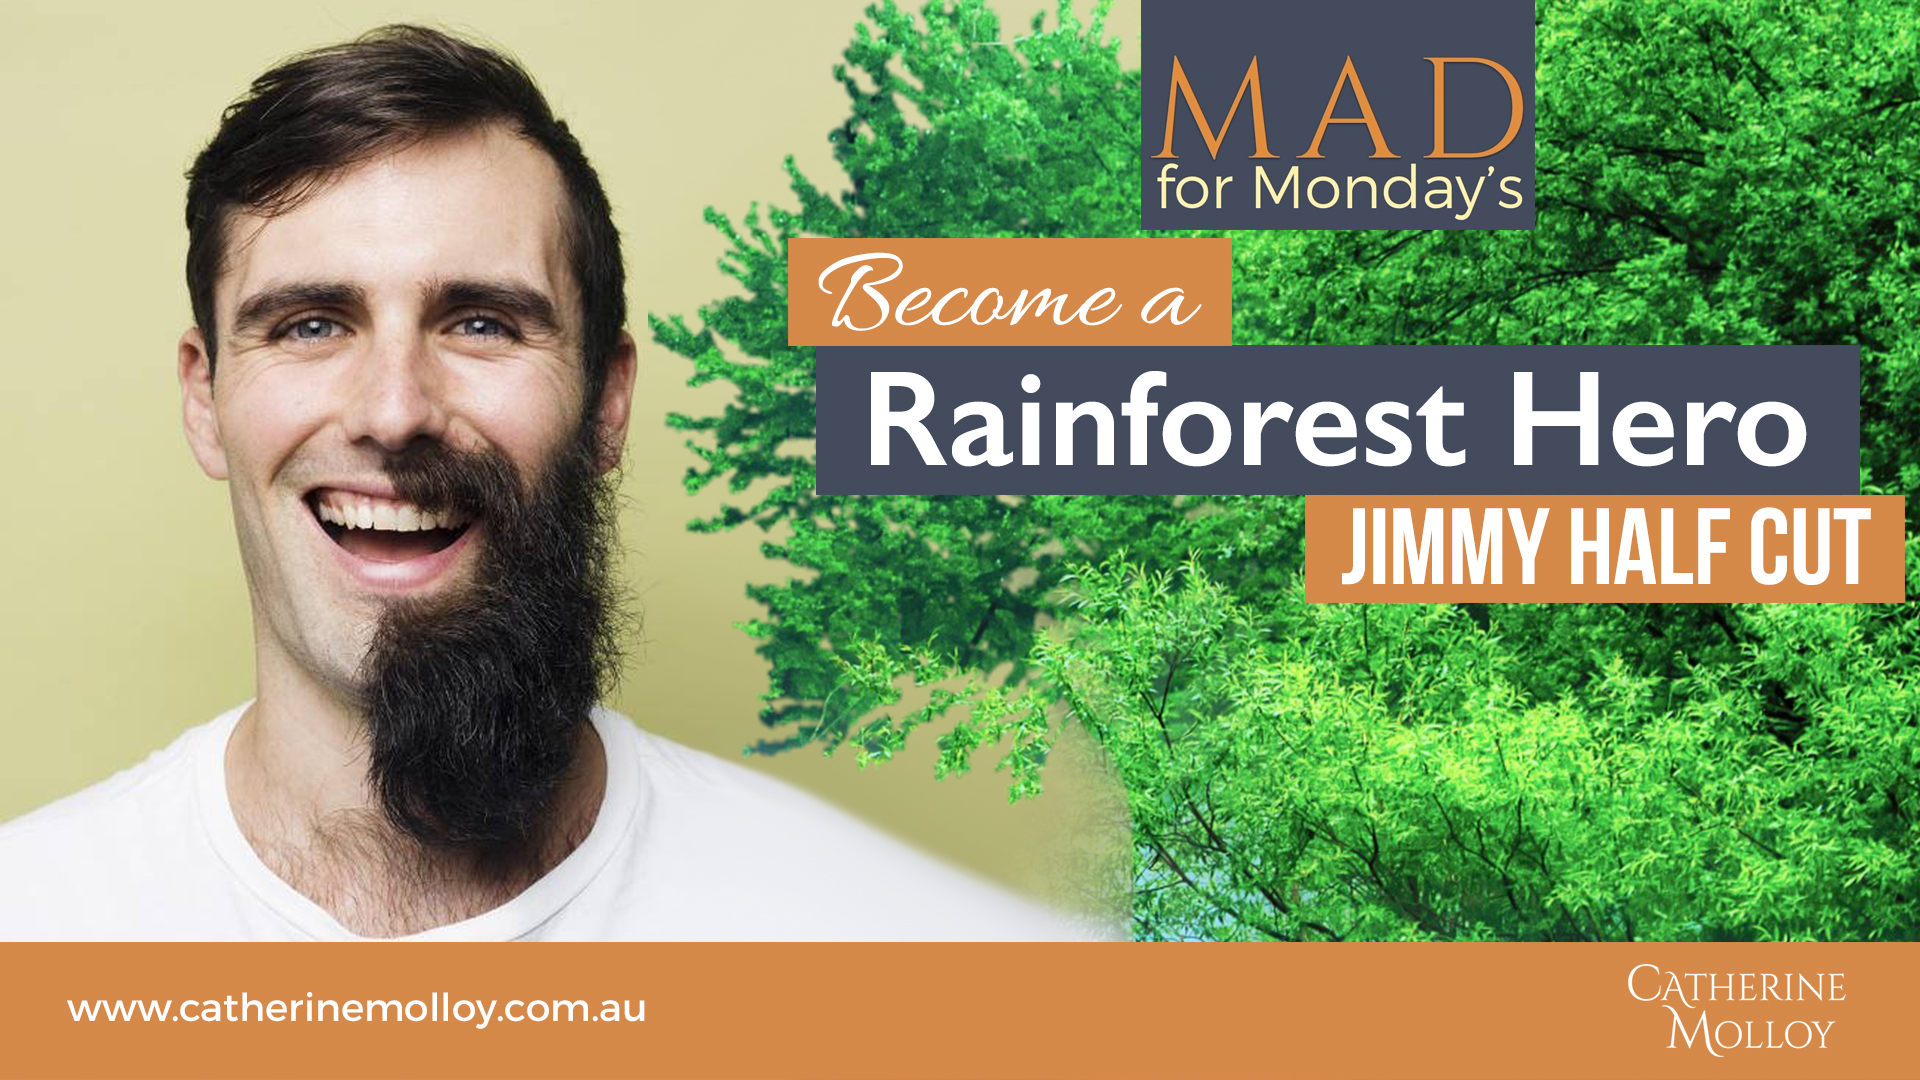 MAD for Monday’s – Become a Rainforest Hero